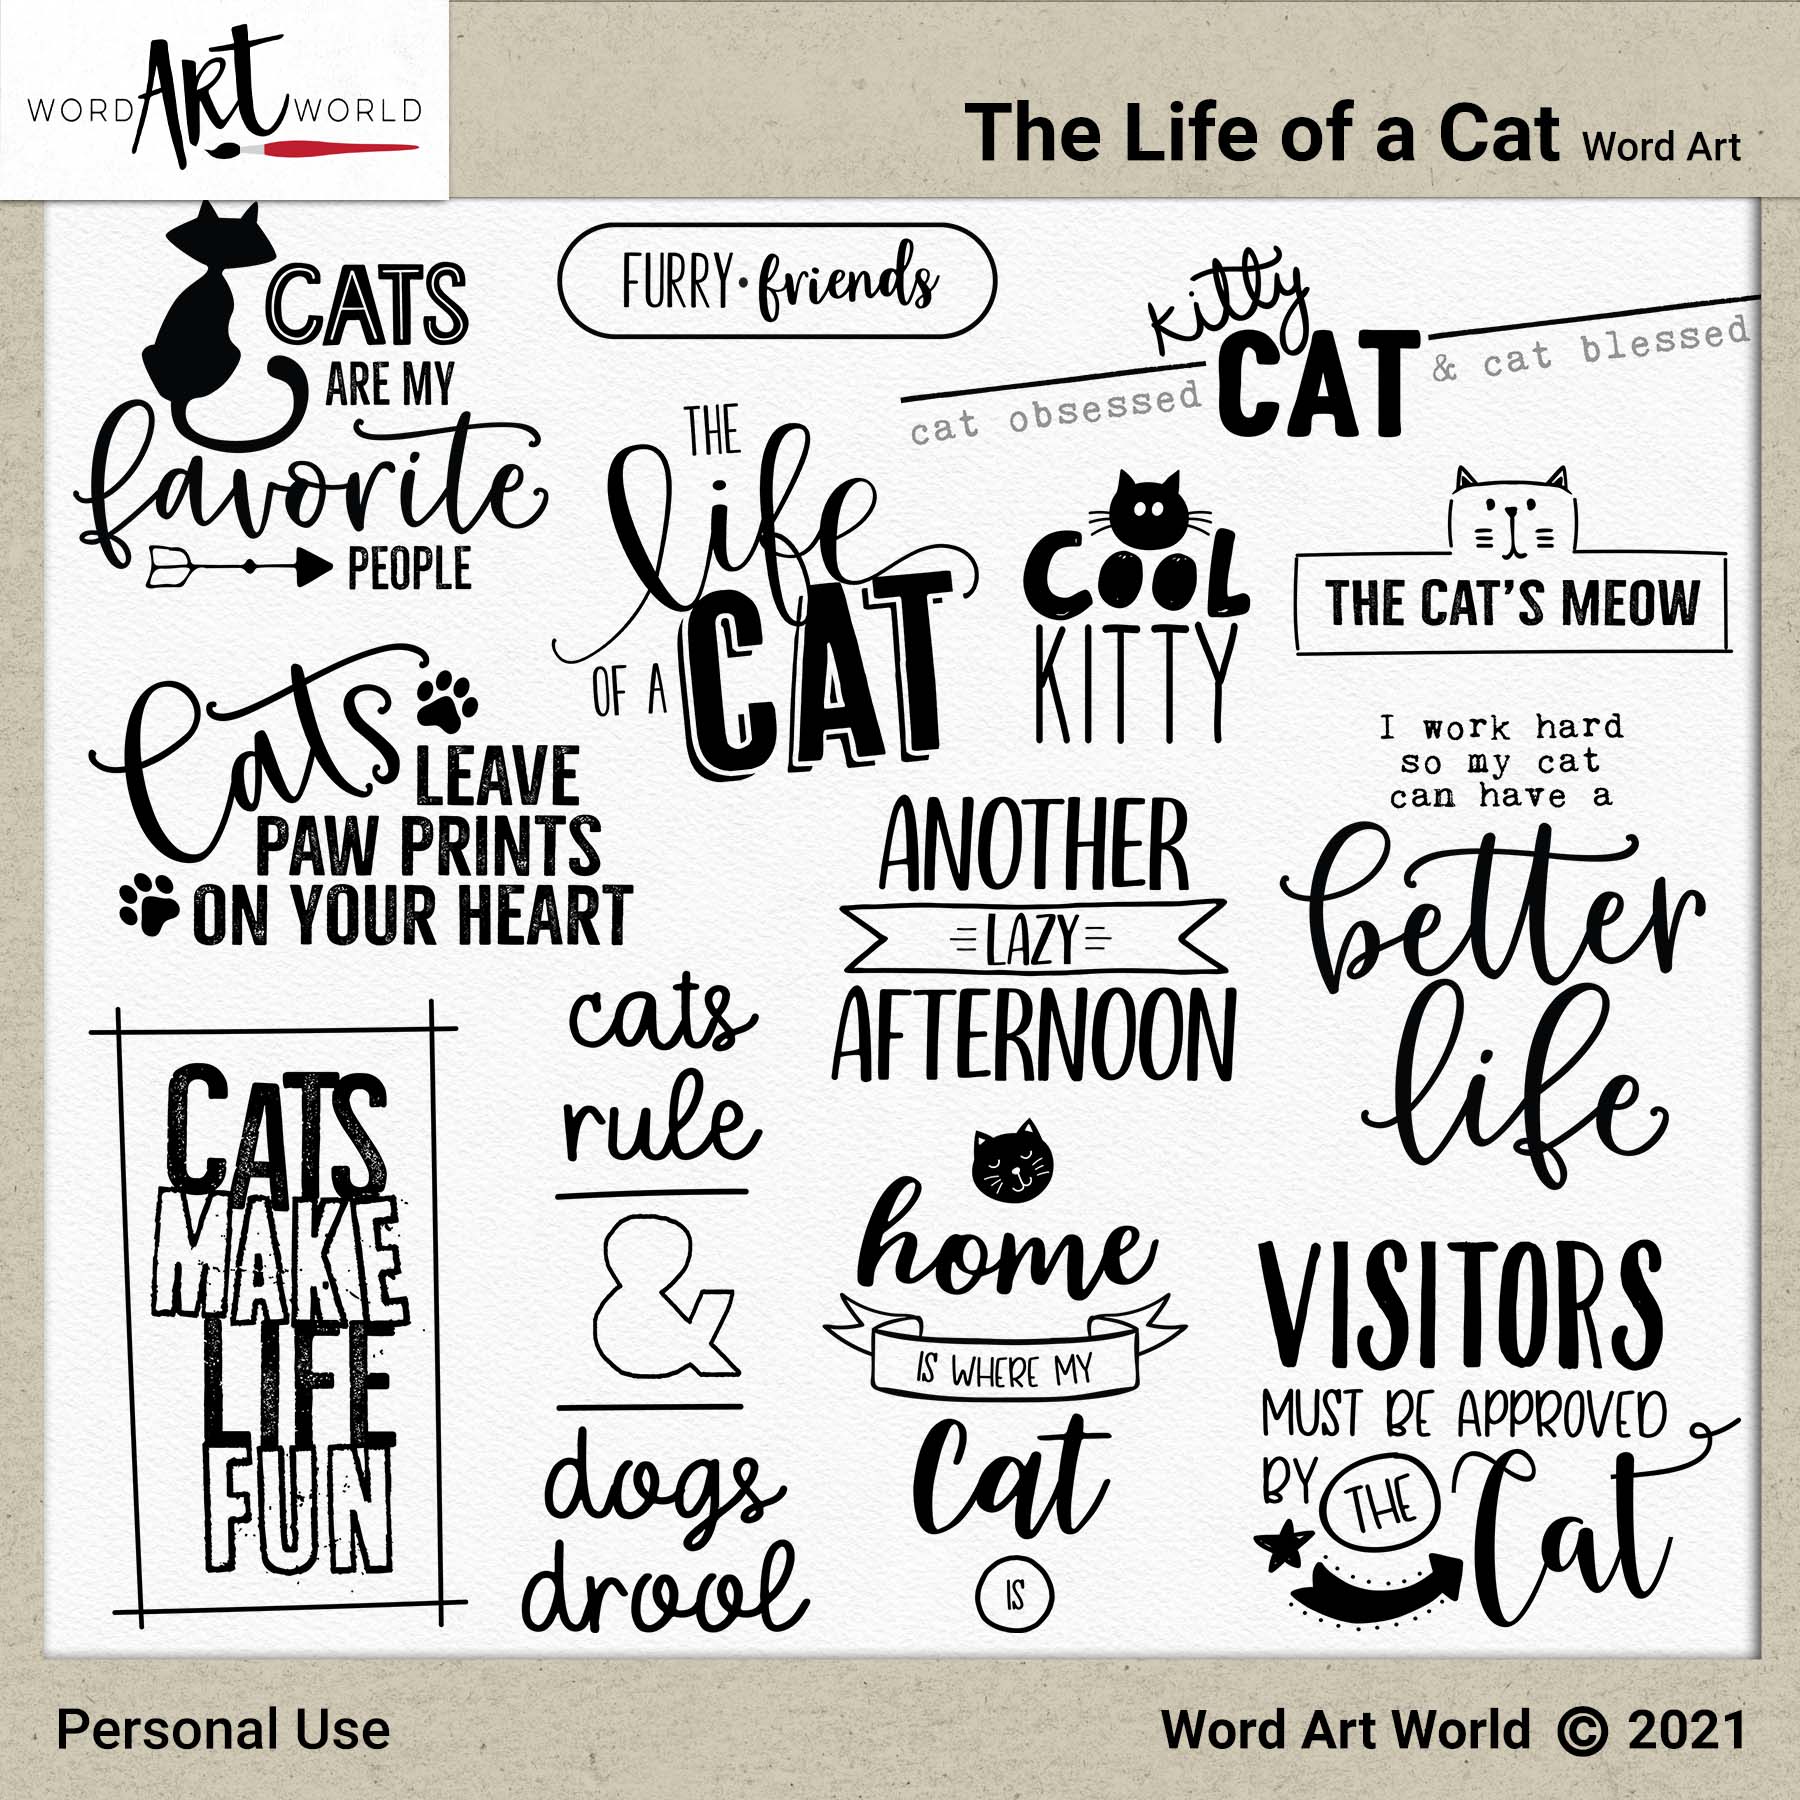 The Life of a Cat Word Art